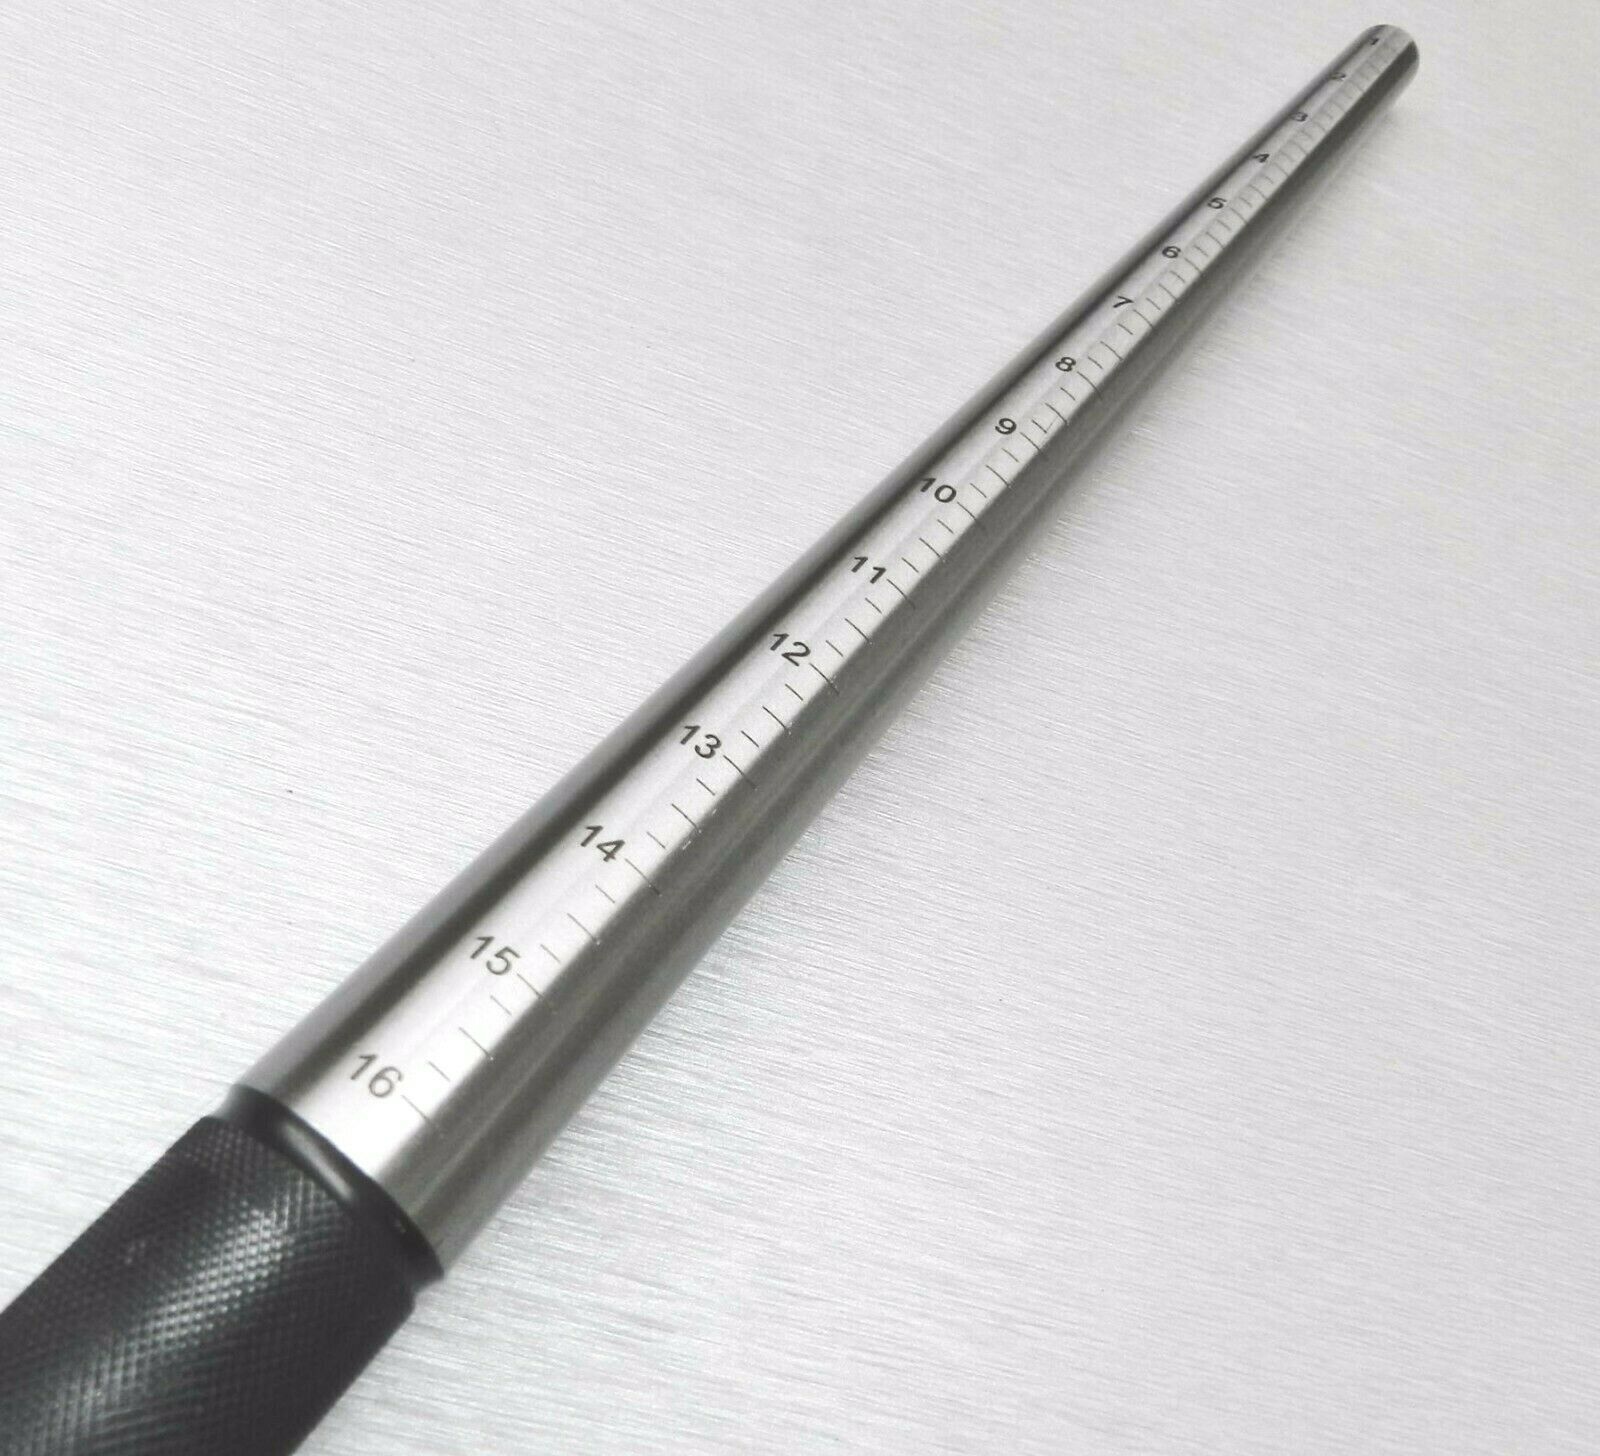 1-16 Steel Ring Mandrel Graduated Marked Sizer Metal Jewelry Sizing Tool Stick